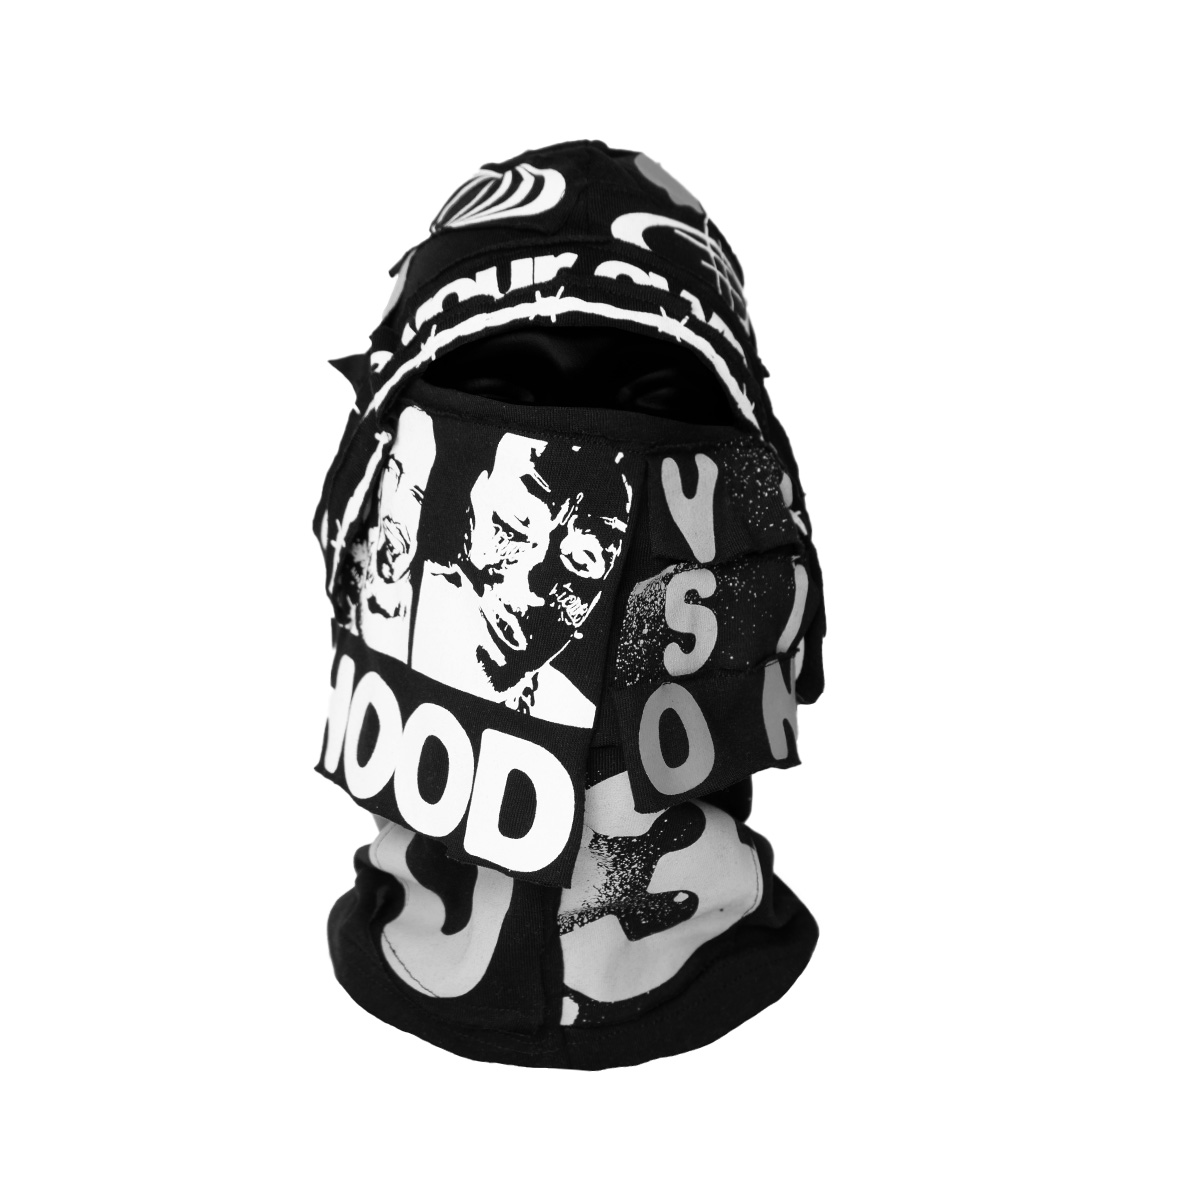 No-Face Recycled Mask - Black/Grey